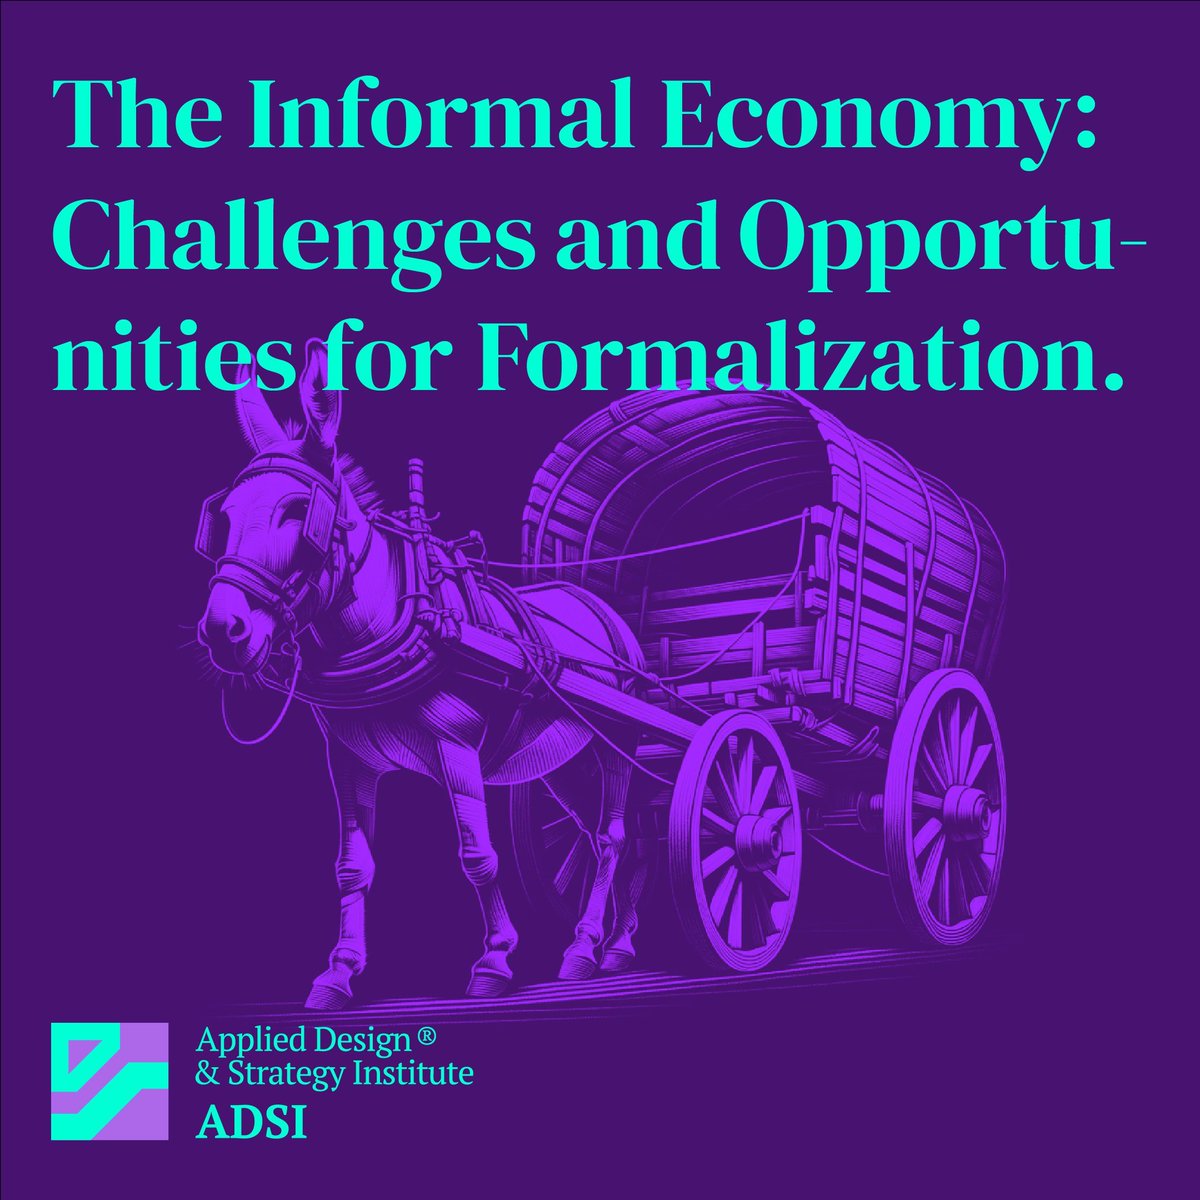 Addressing the challenges and uncovering the opportunities within the informal economy. 🛒 #InformalEconomy #EconomicOpportunity #Formalization #Entrepreneurship